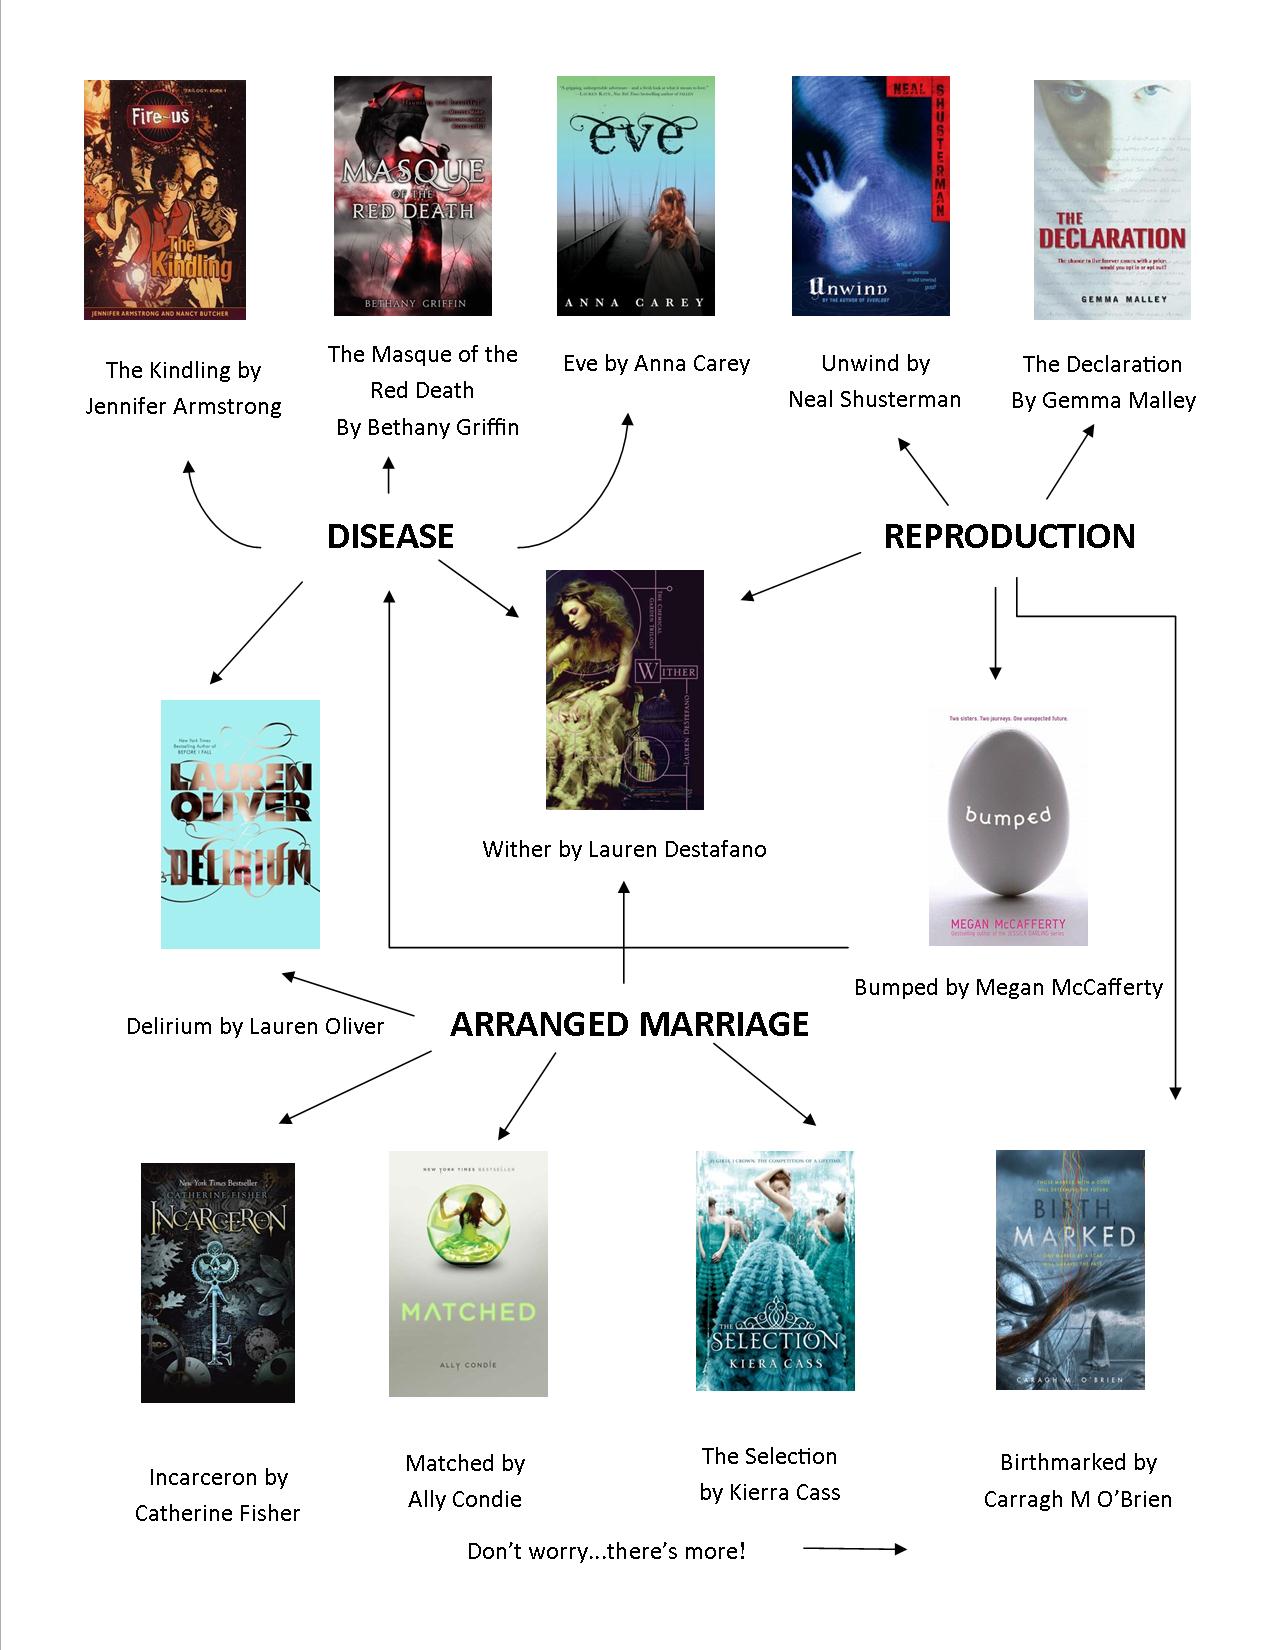 If You Like The Hunger Games, Read These Books